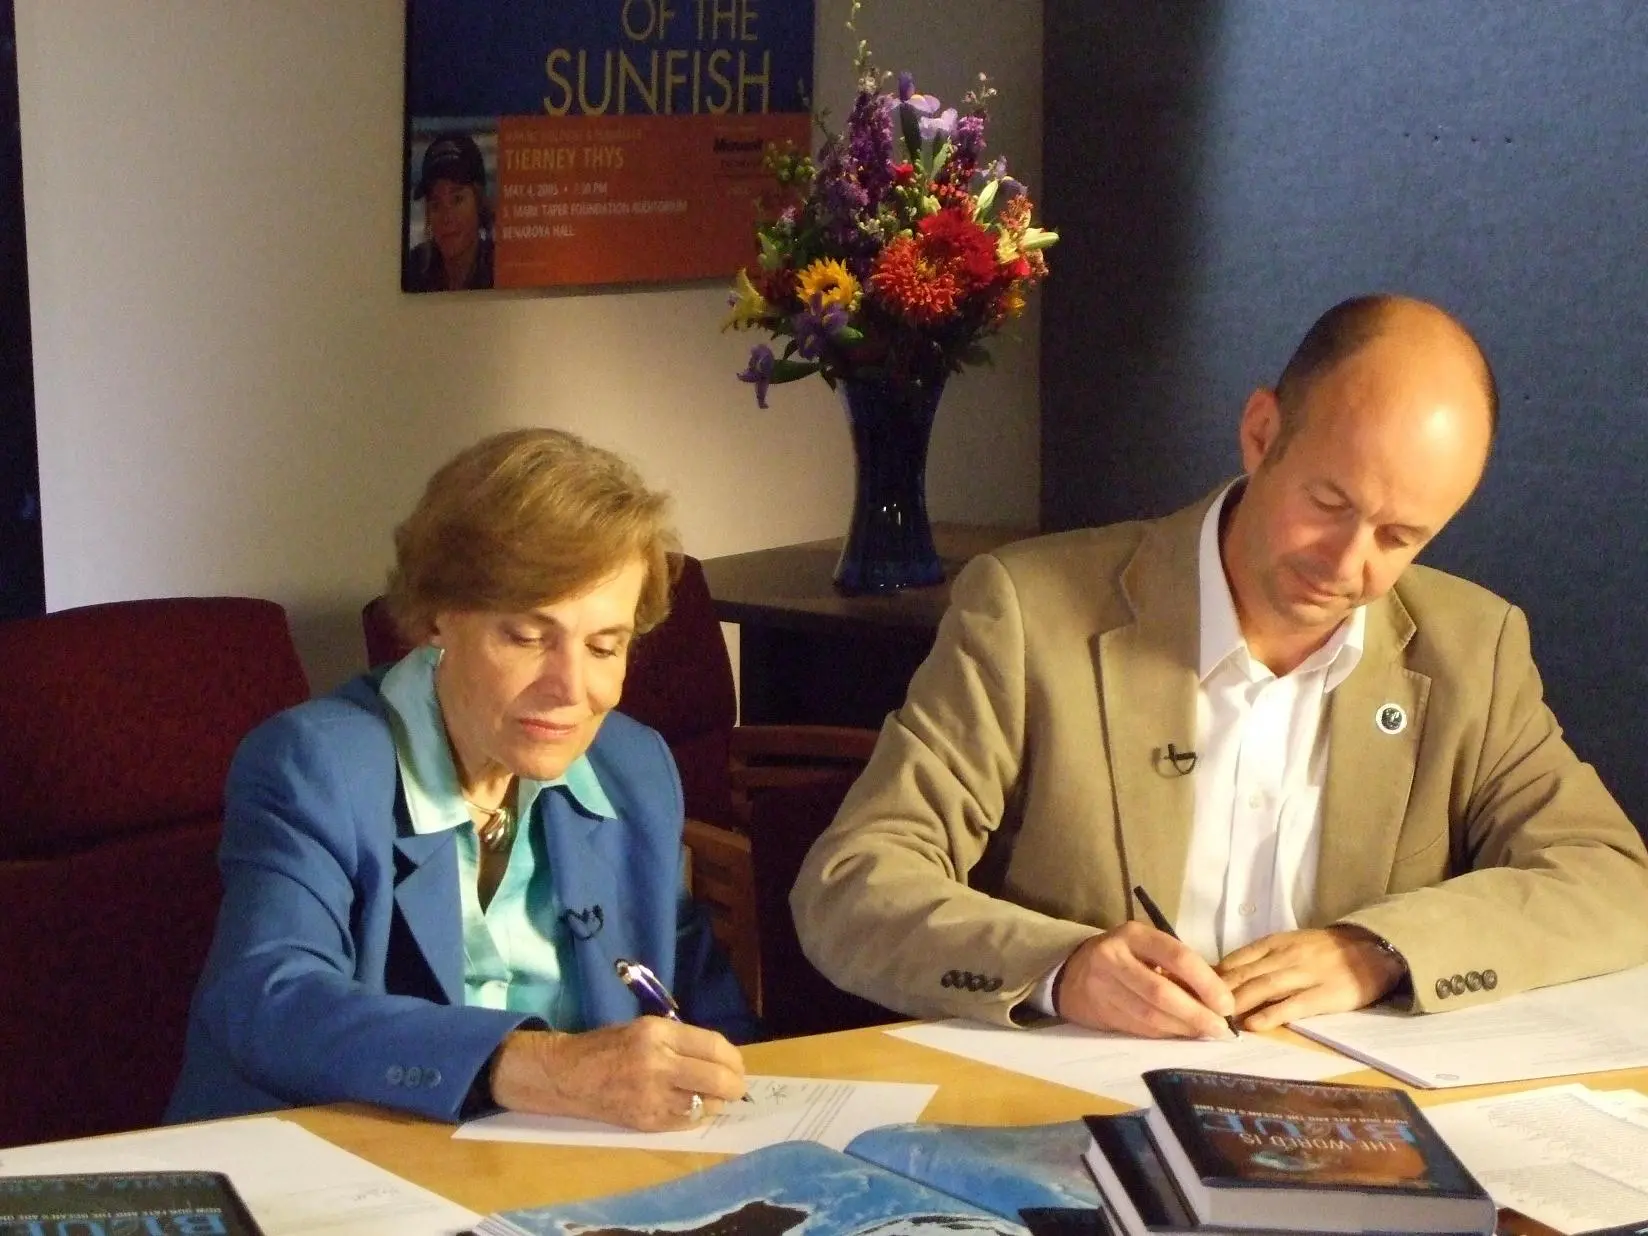 Dan and Sylvia urge 106 leaders to step up global protection of the ocean